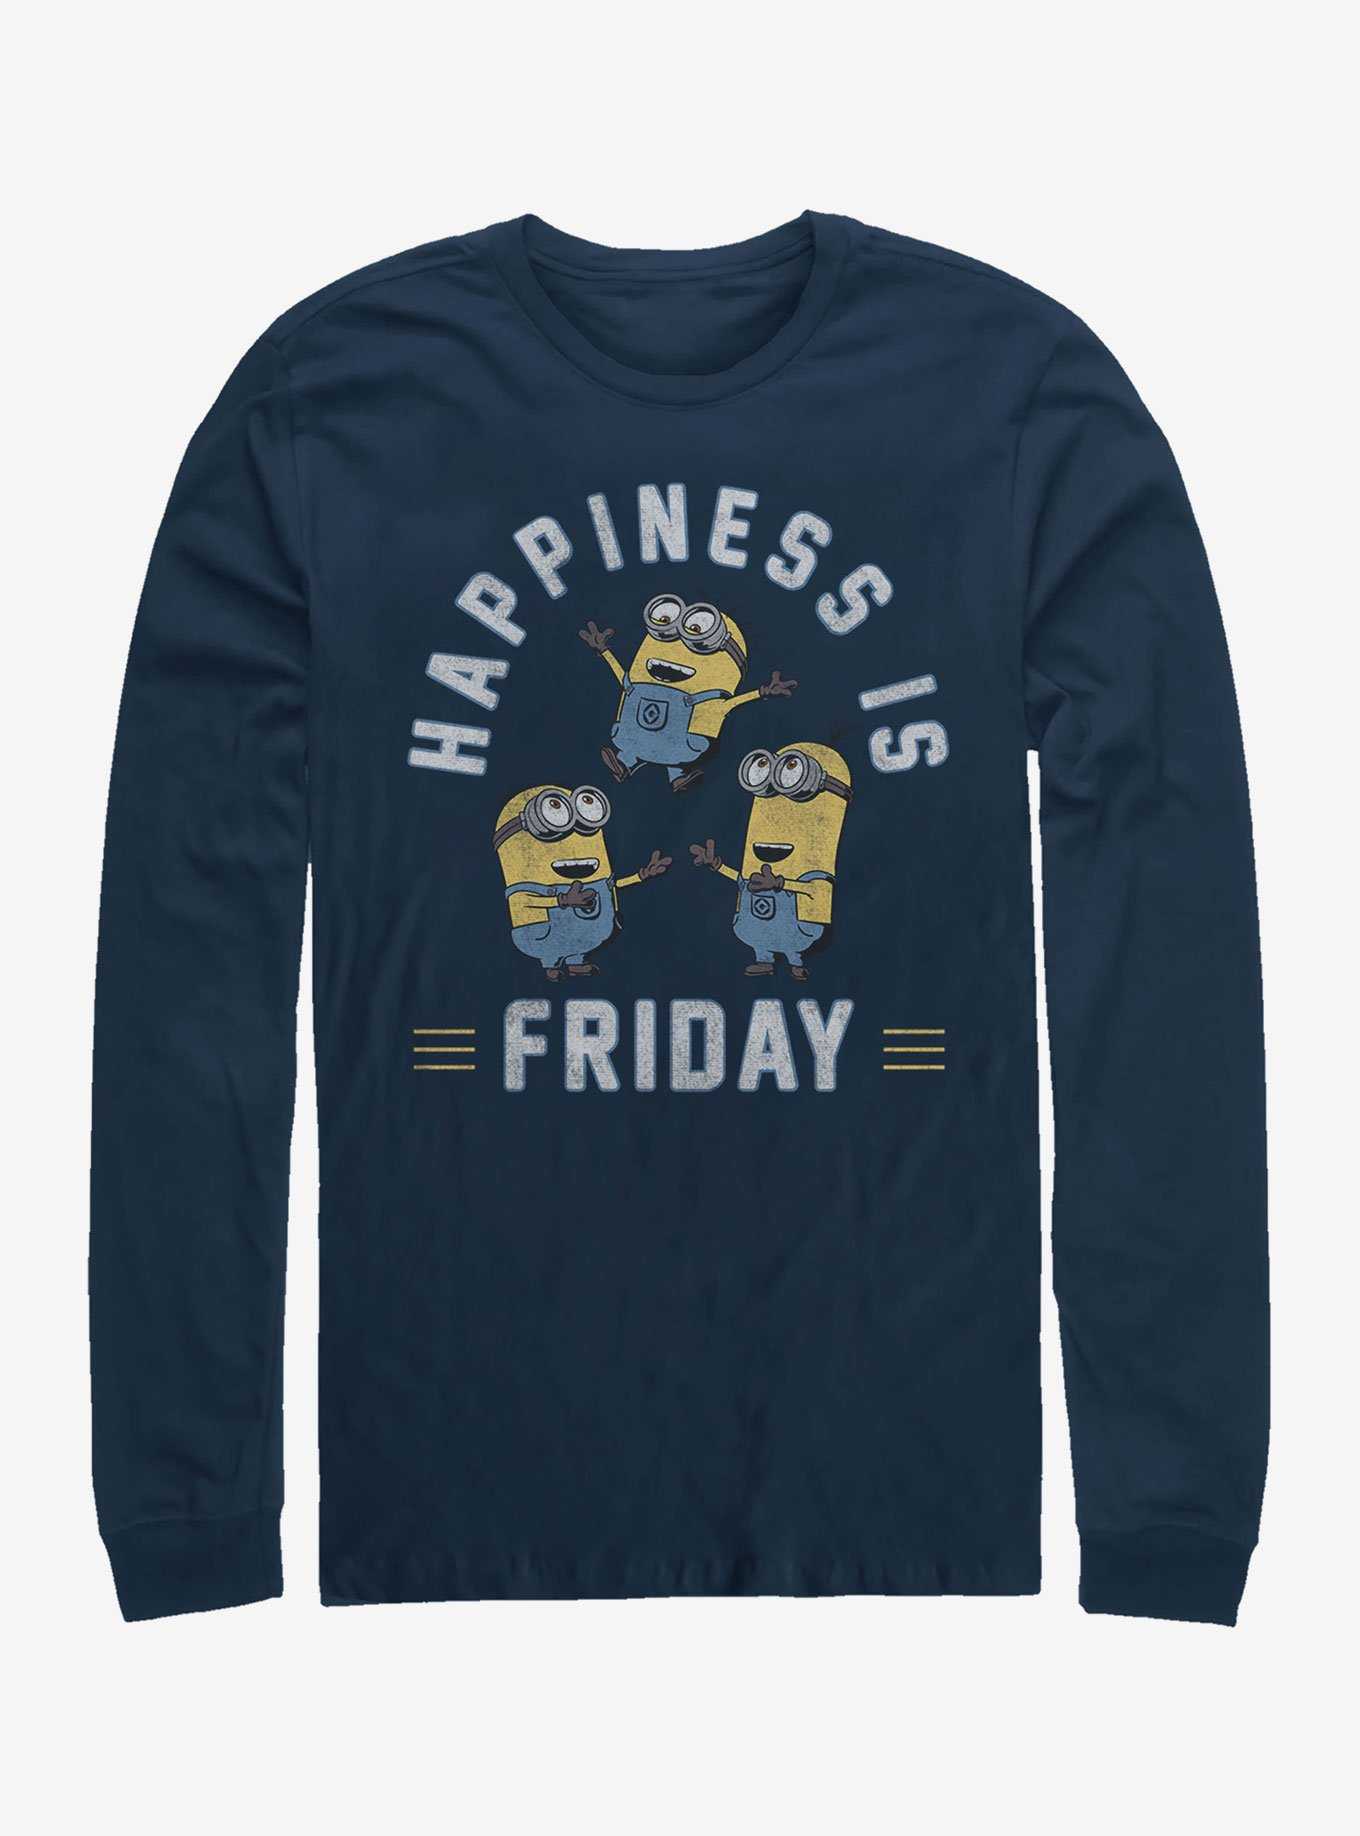 Minions Happiness is Friday Long-Sleeve T-Shirt, , hi-res